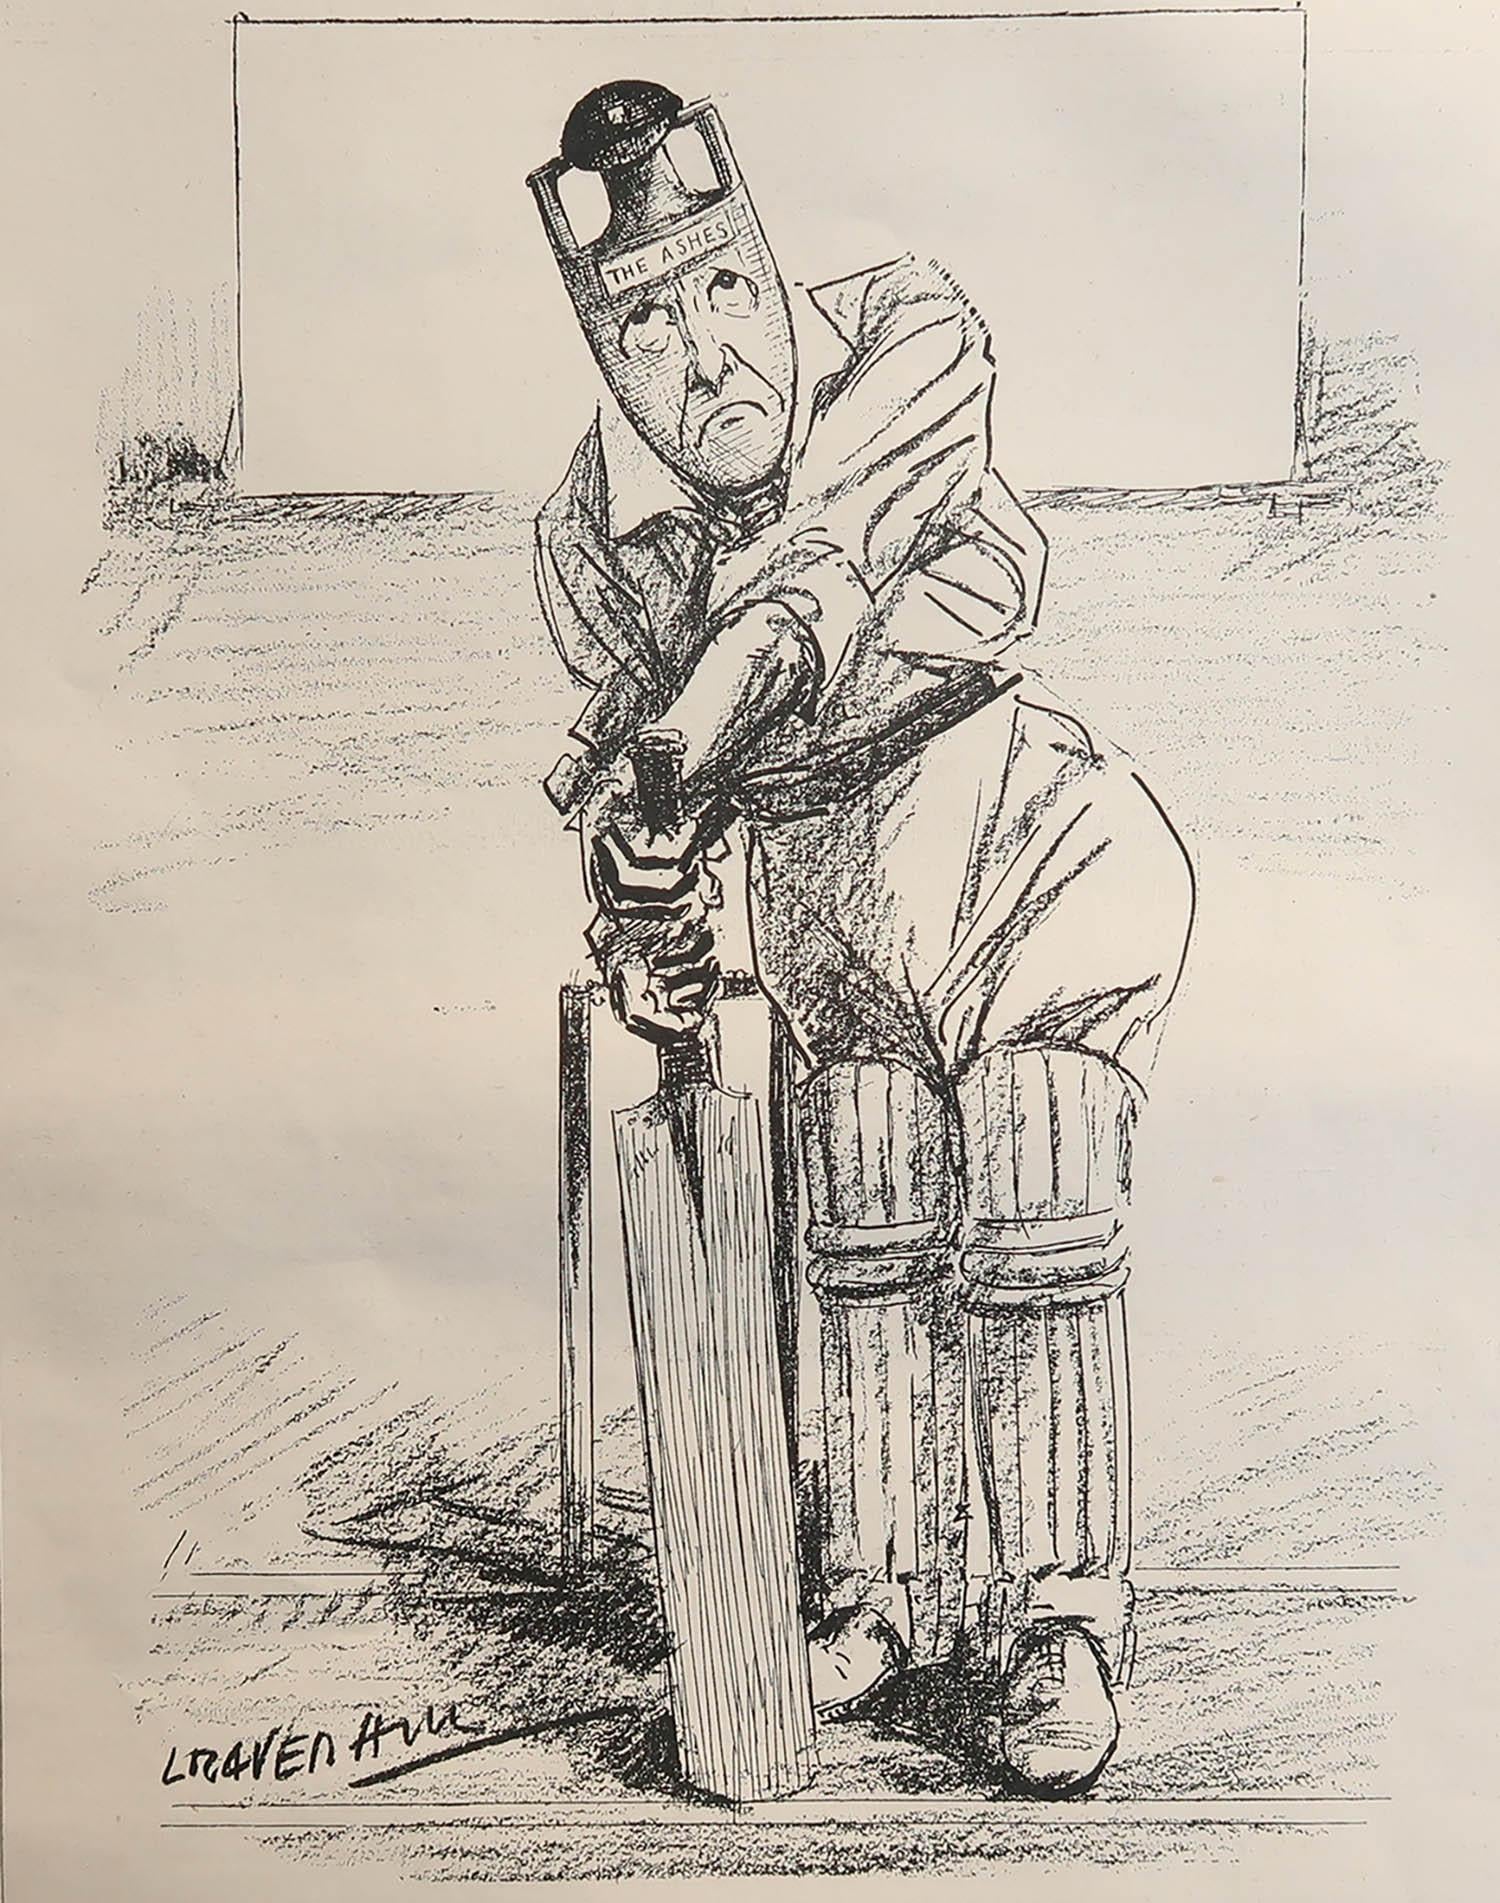 Super cricket image

Originally a plate from Punch or The London Charivari

Published 1934

The measurement given is the paper size



